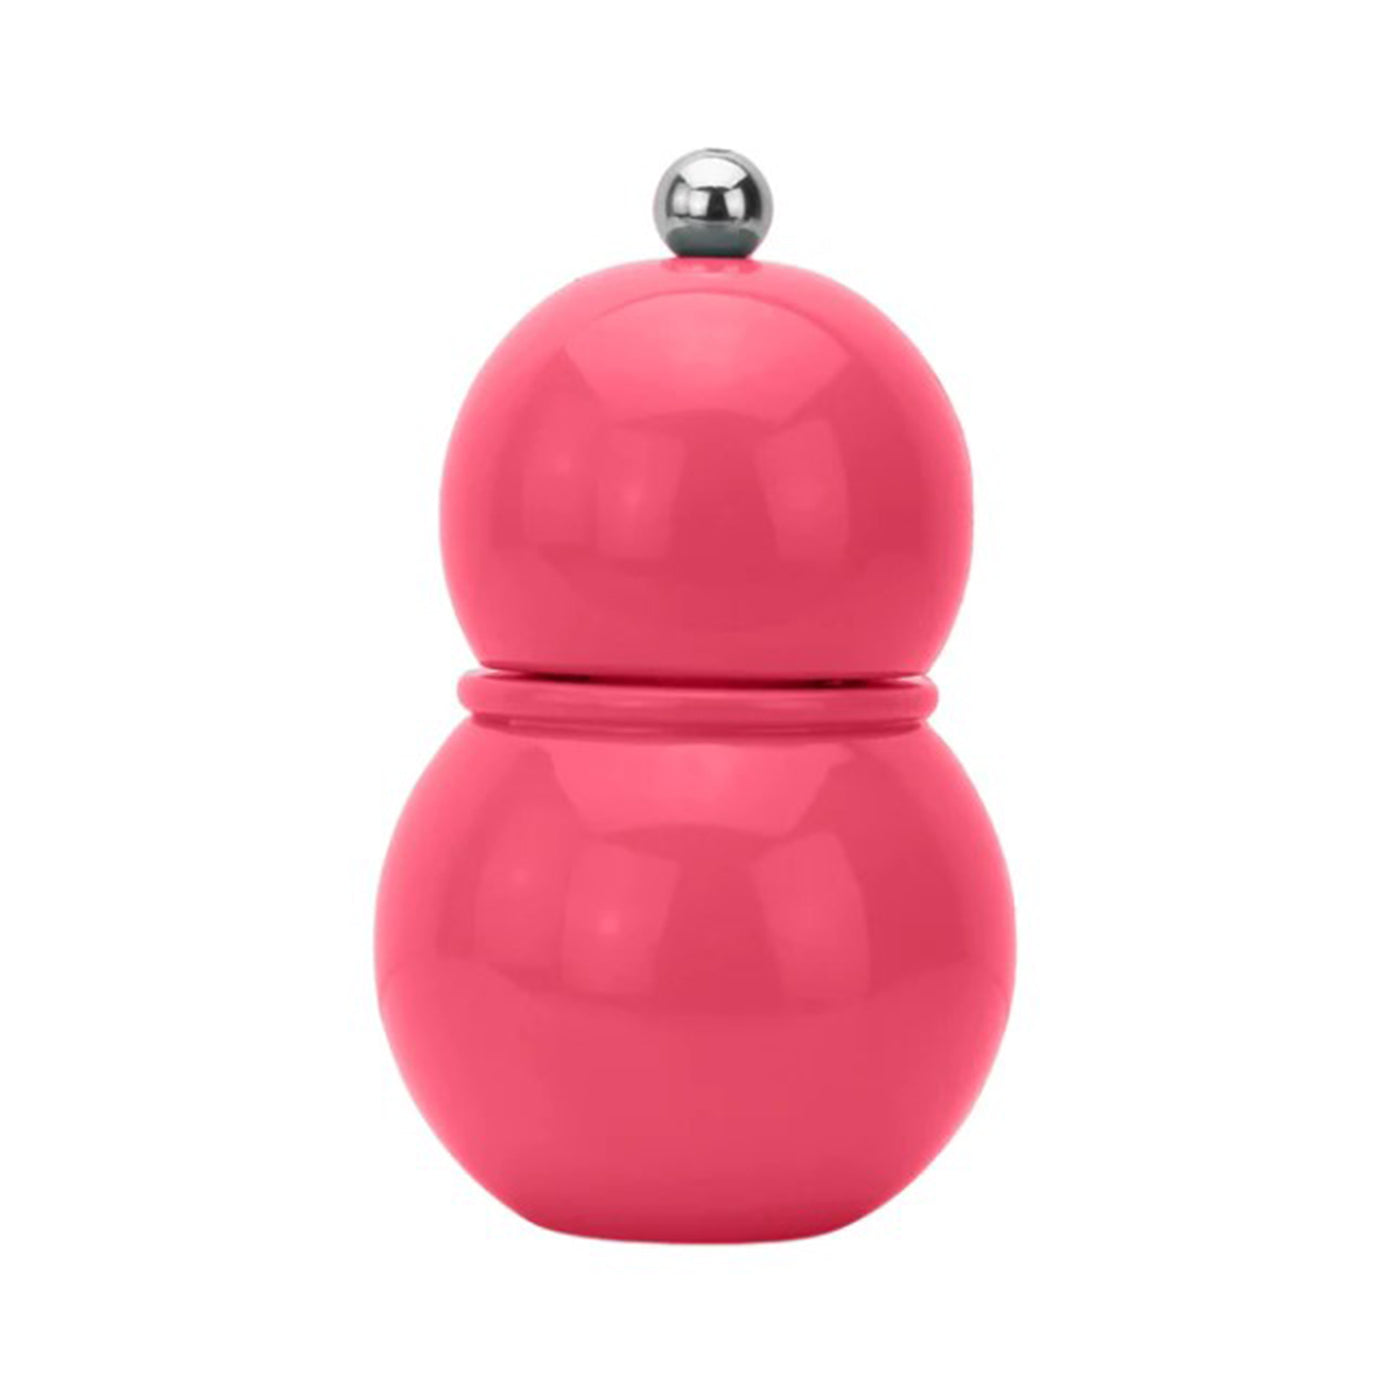 Lacquer Chubby Salt & Pepper Grinder